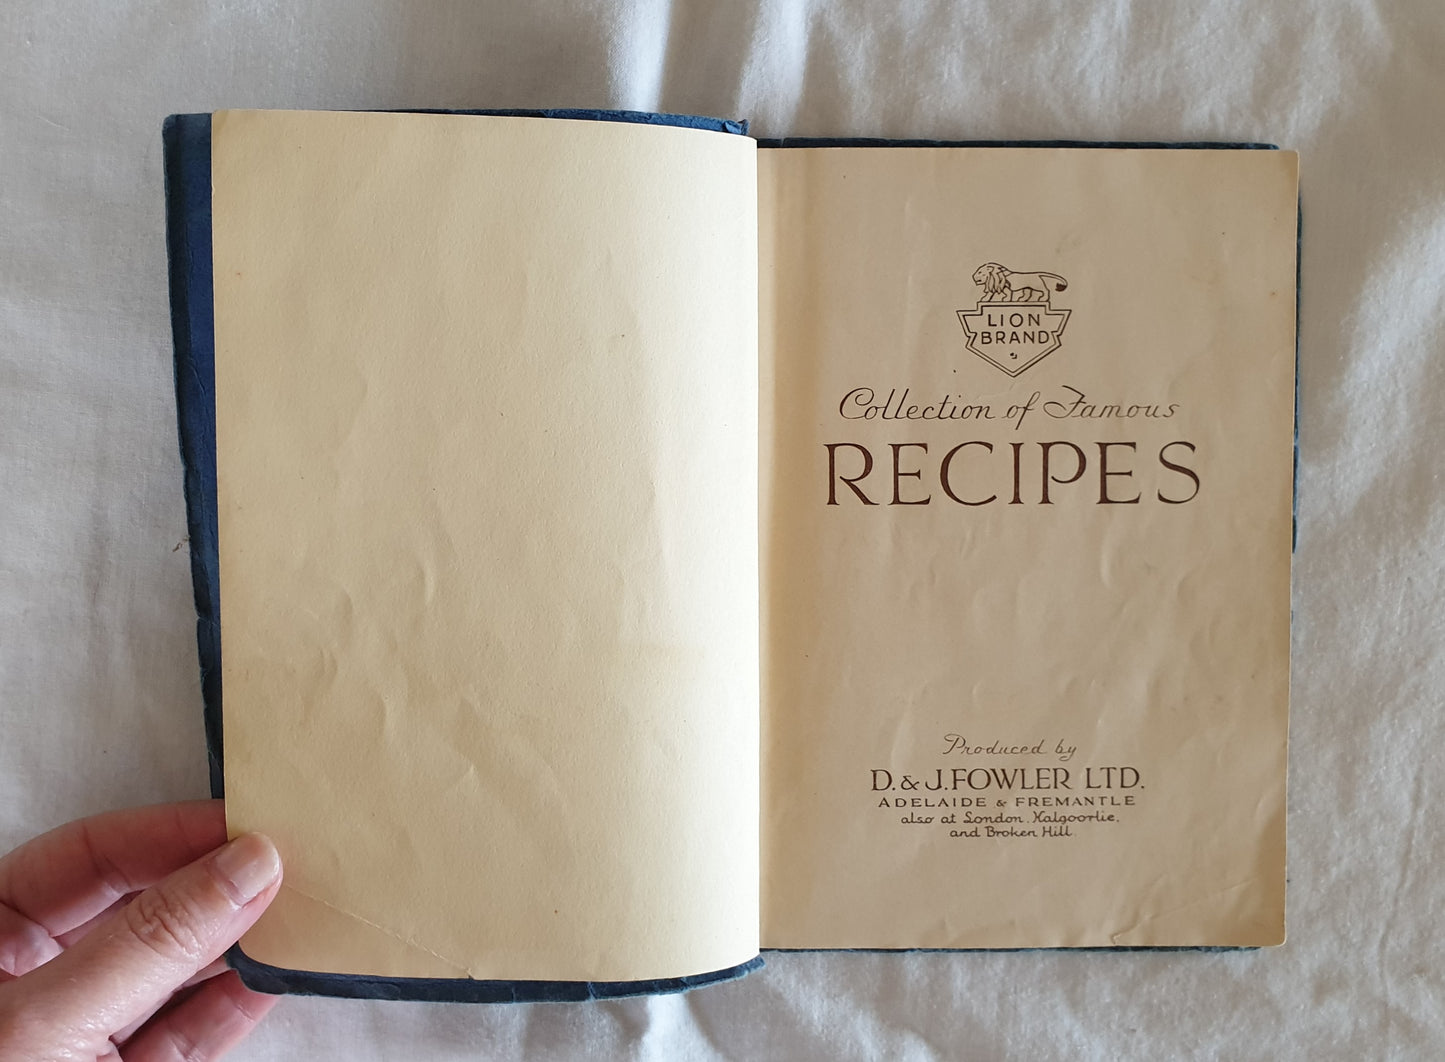 Lion Brand Collection of Famous Recipes by D. & J. Fowler